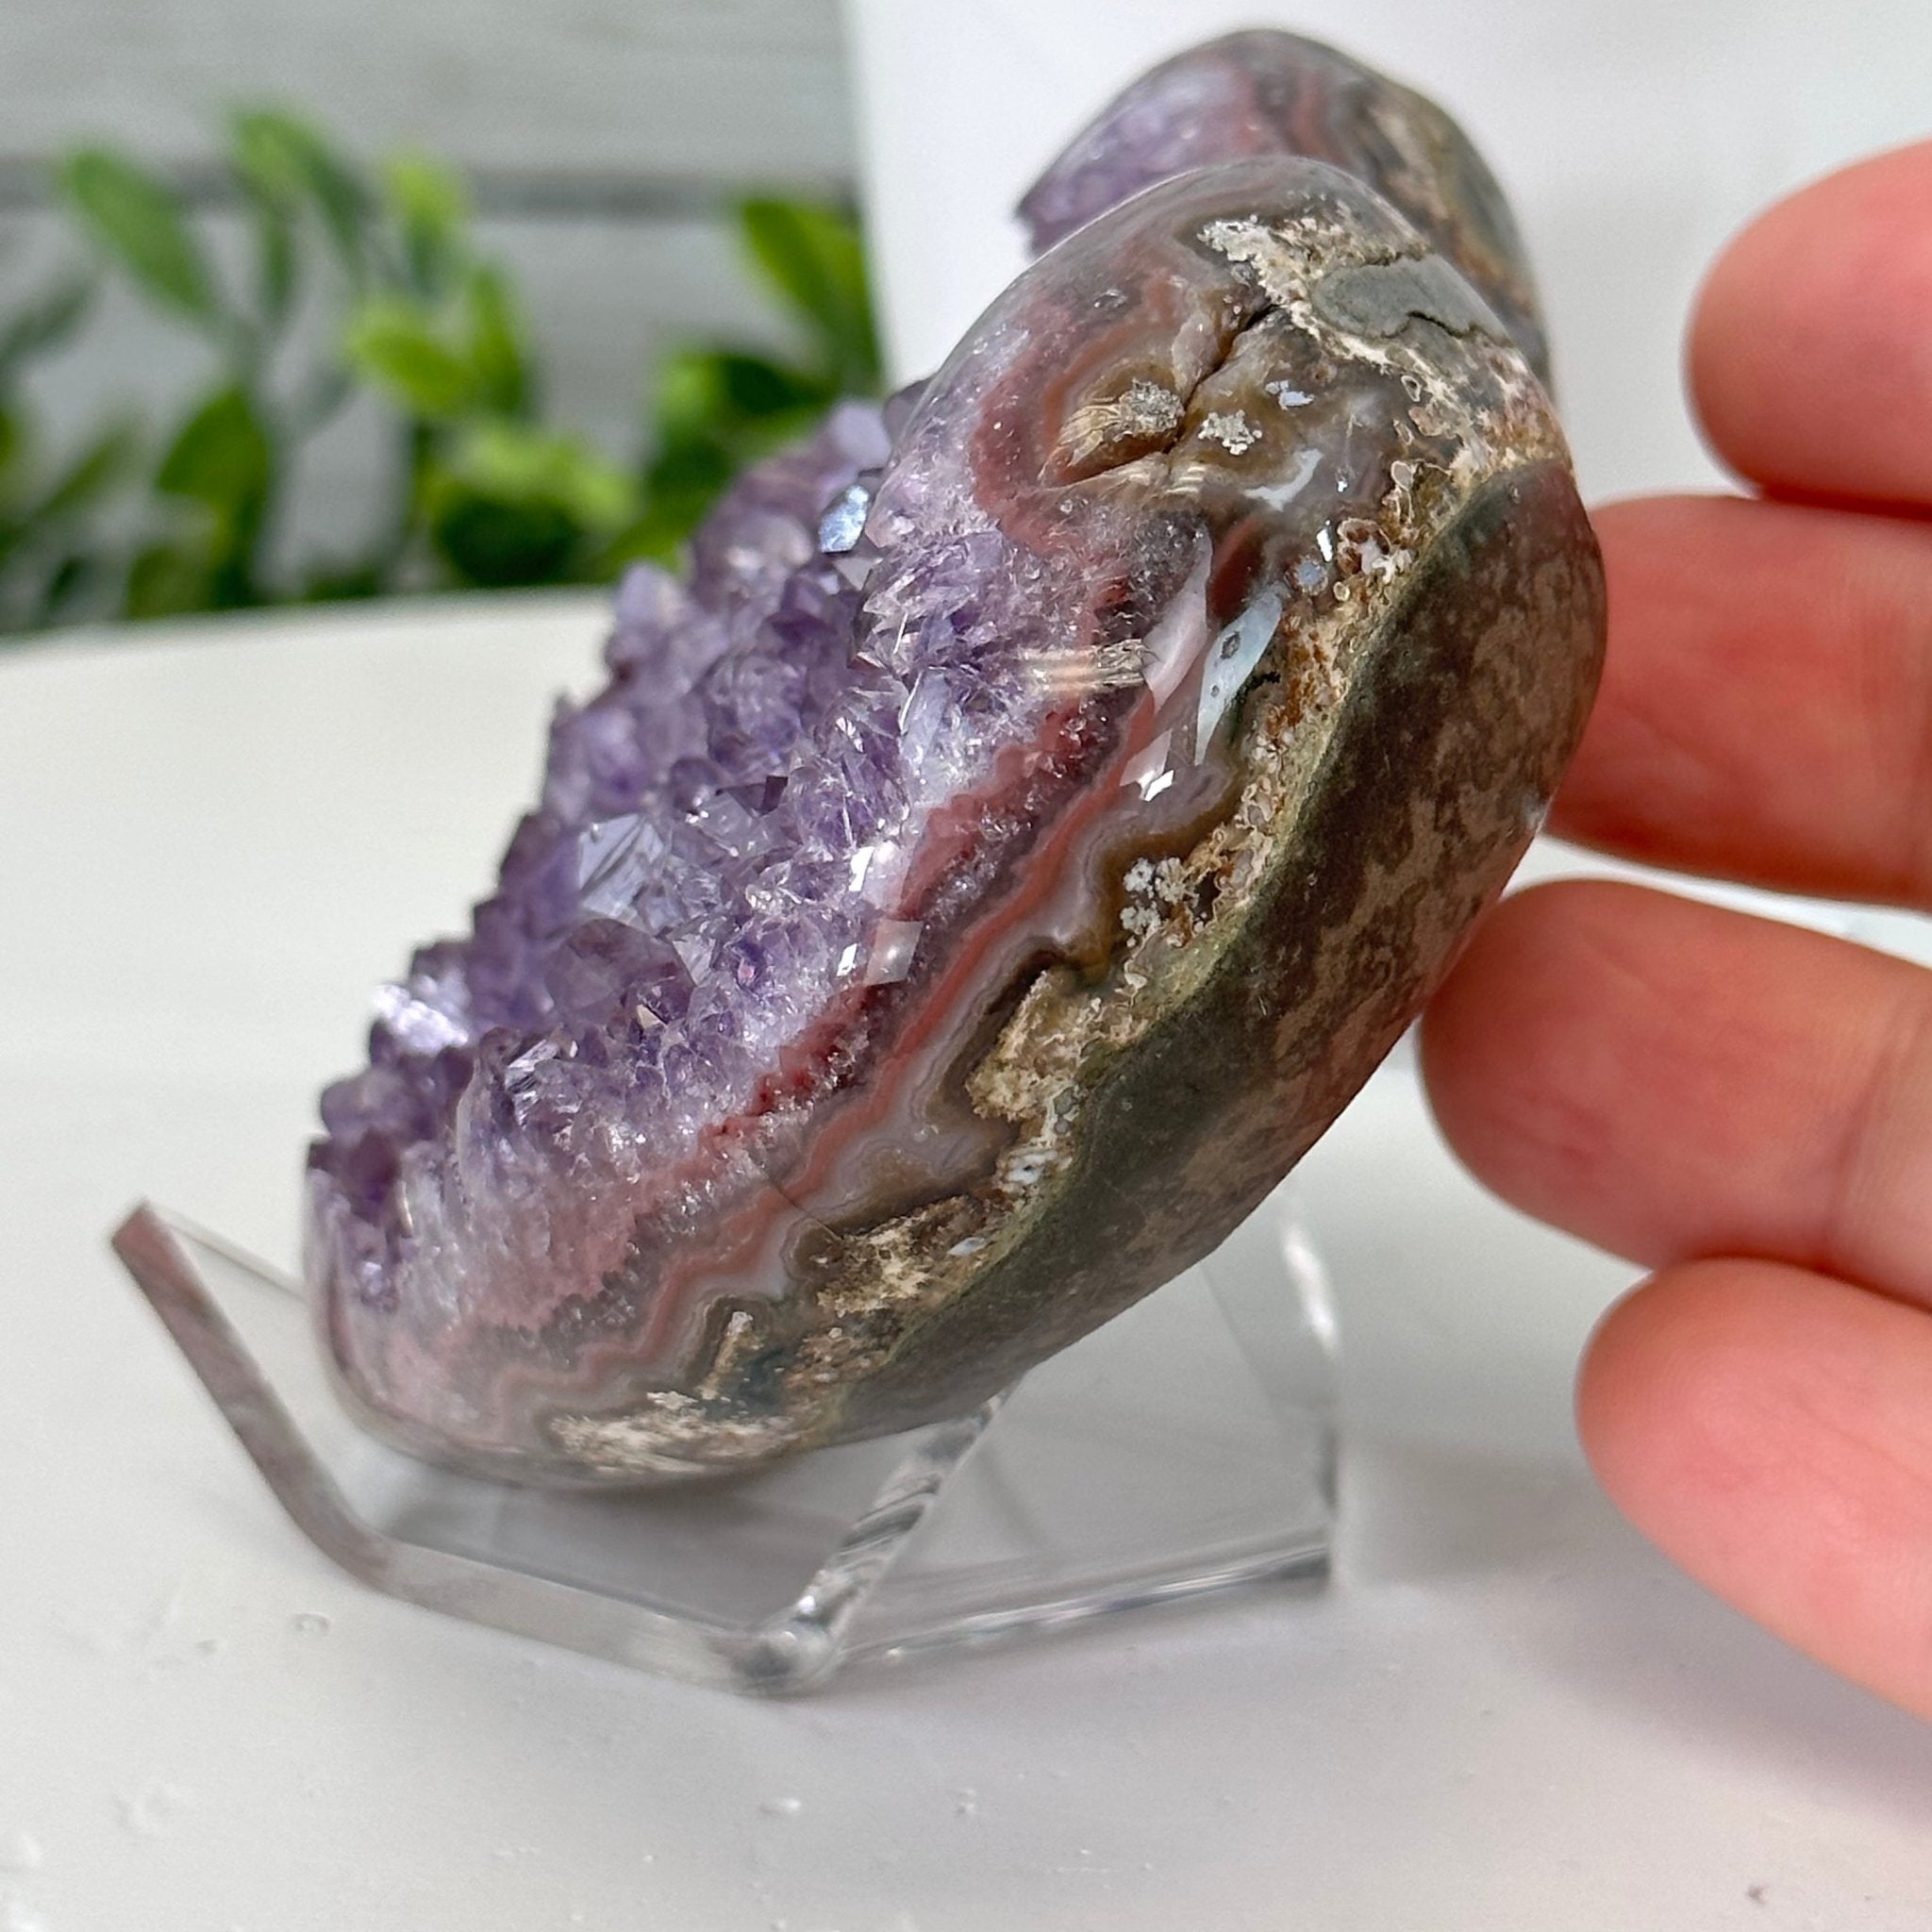 Extra Quality Amethyst Heart Geode on an Acrylic Stand 0.67 lbs & 2.7" Tall #5462-0090 by Brazil Gems - Brazil GemsBrazil GemsExtra Quality Amethyst Heart Geode on an Acrylic Stand 0.67 lbs & 2.7" Tall #5462-0090 by Brazil GemsHearts5462-0090